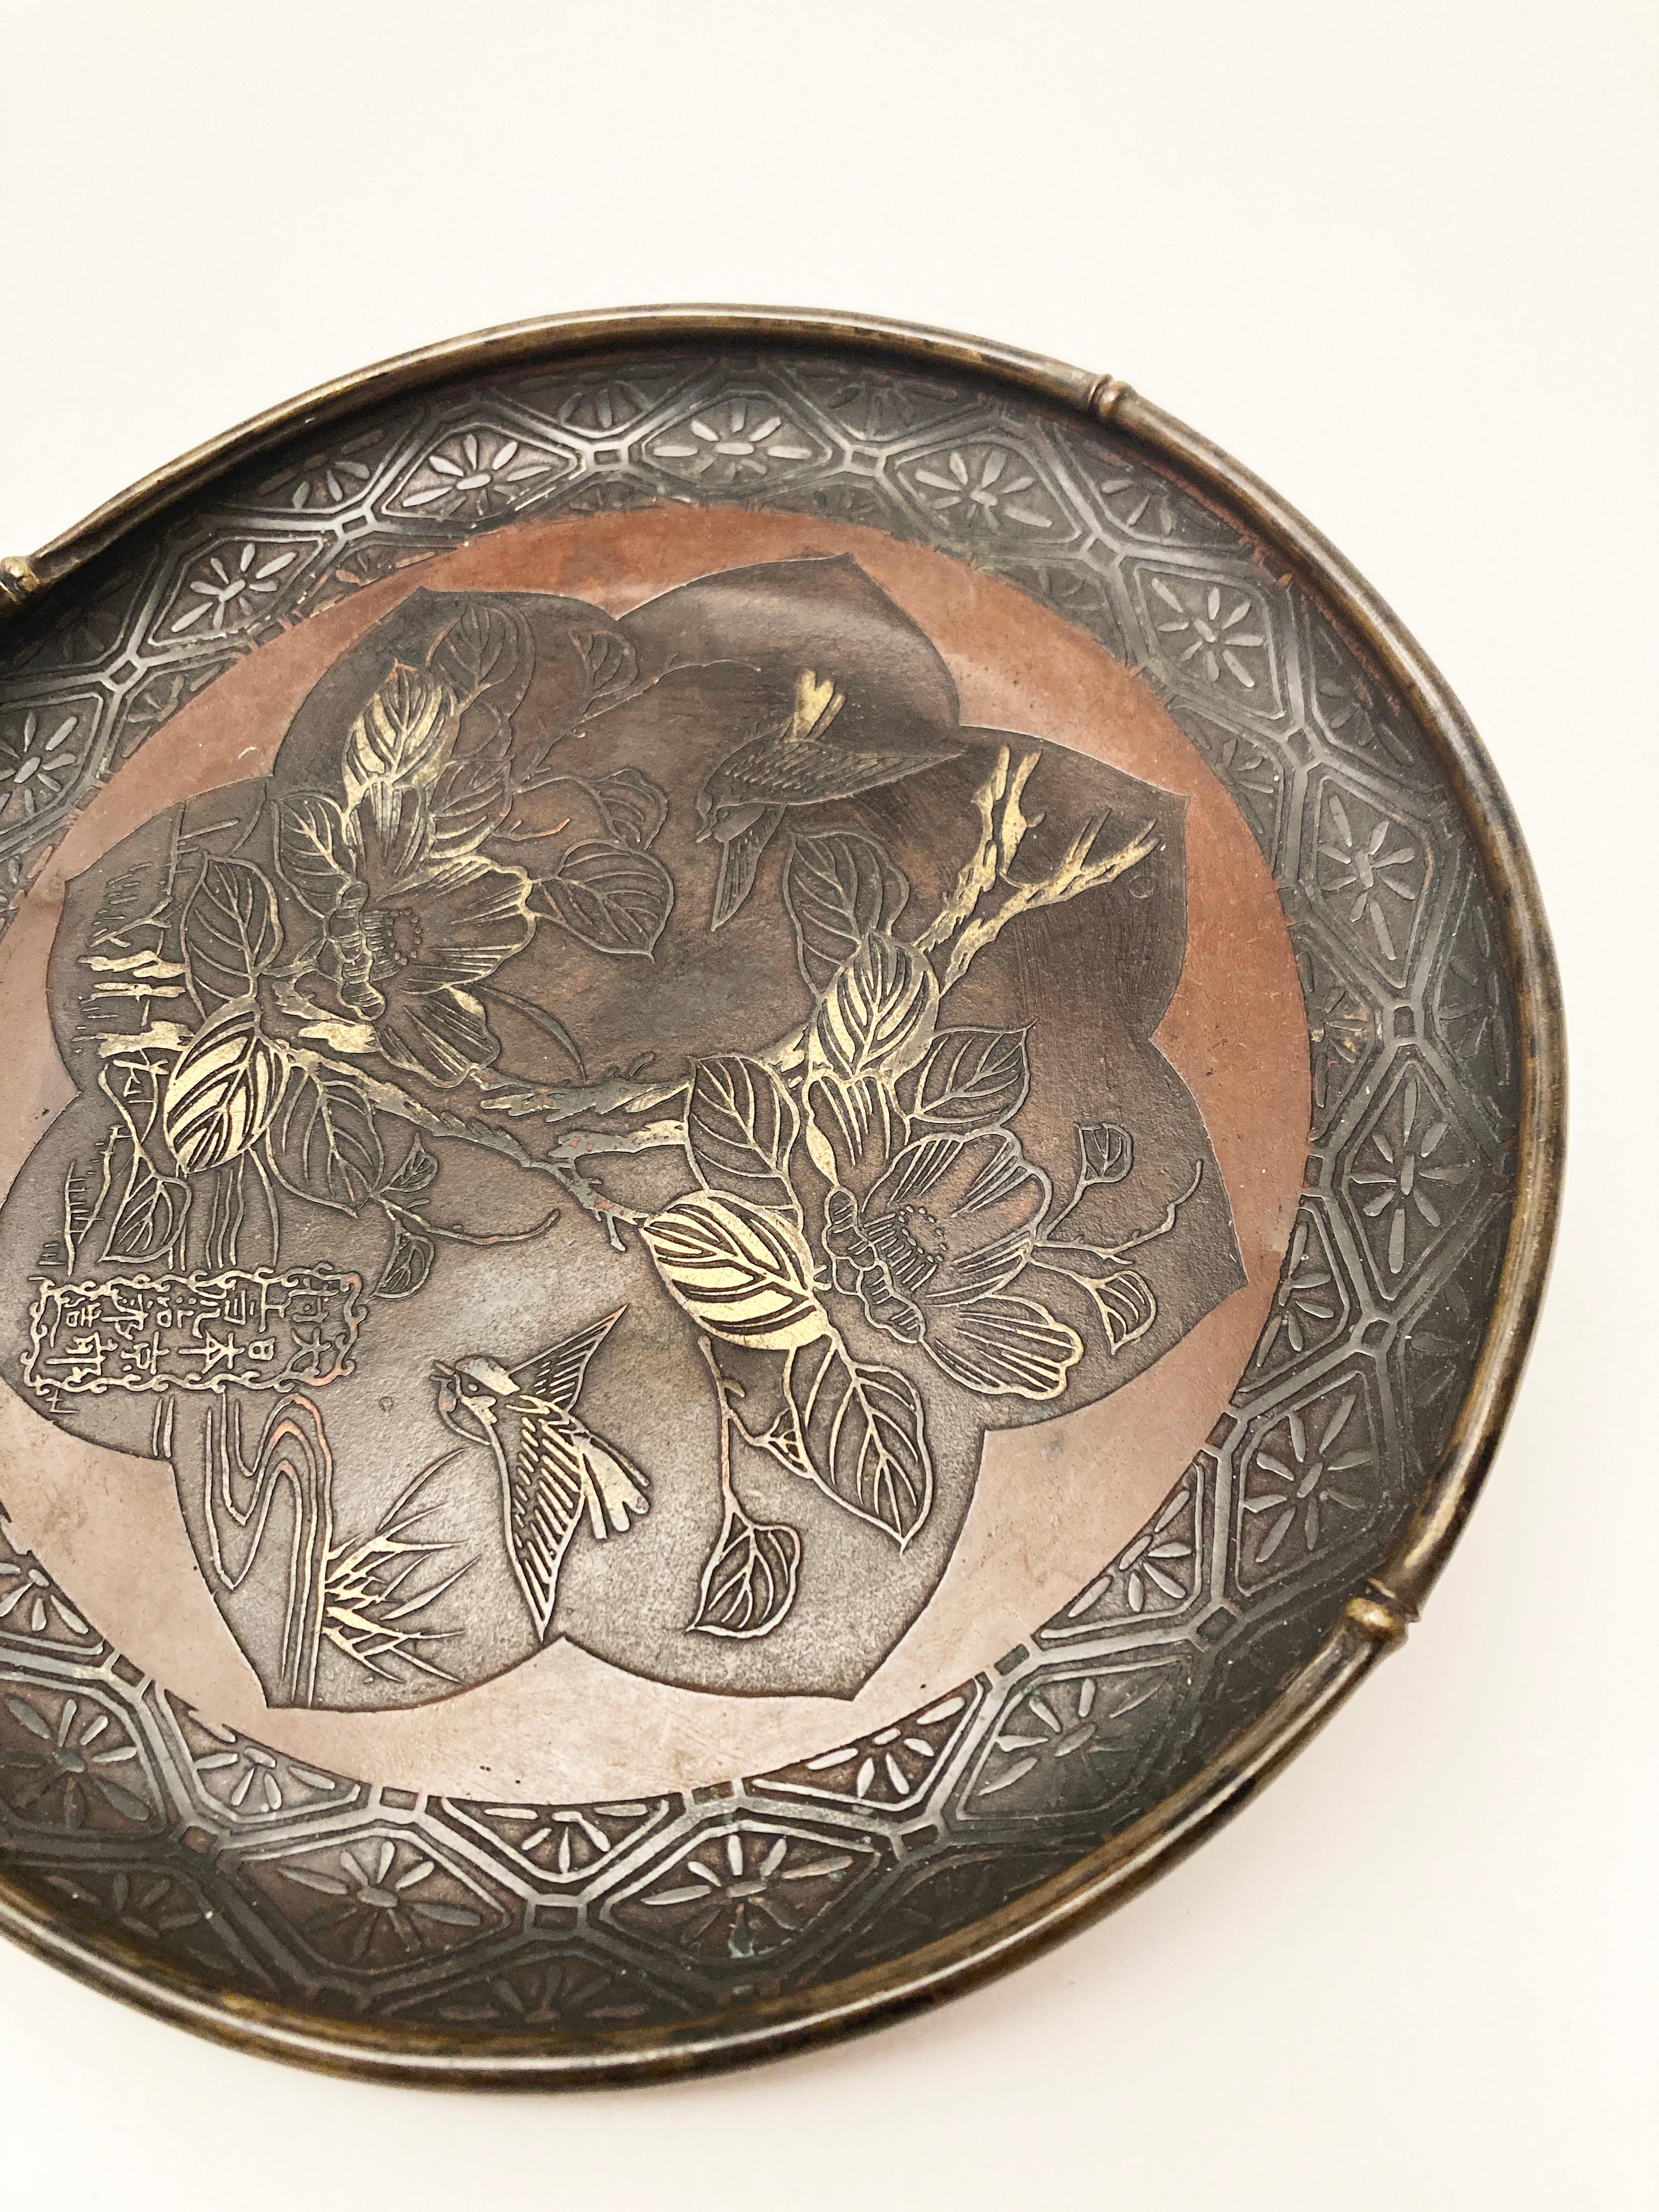 This stunning work of Japanese metal work is brilliant in detail and craftsmanship. Made of copper, bronze and perhaps other metals, the imagery created on the plate's center is remarkable. Depicting beautiful blooming foliage on tree limbs and